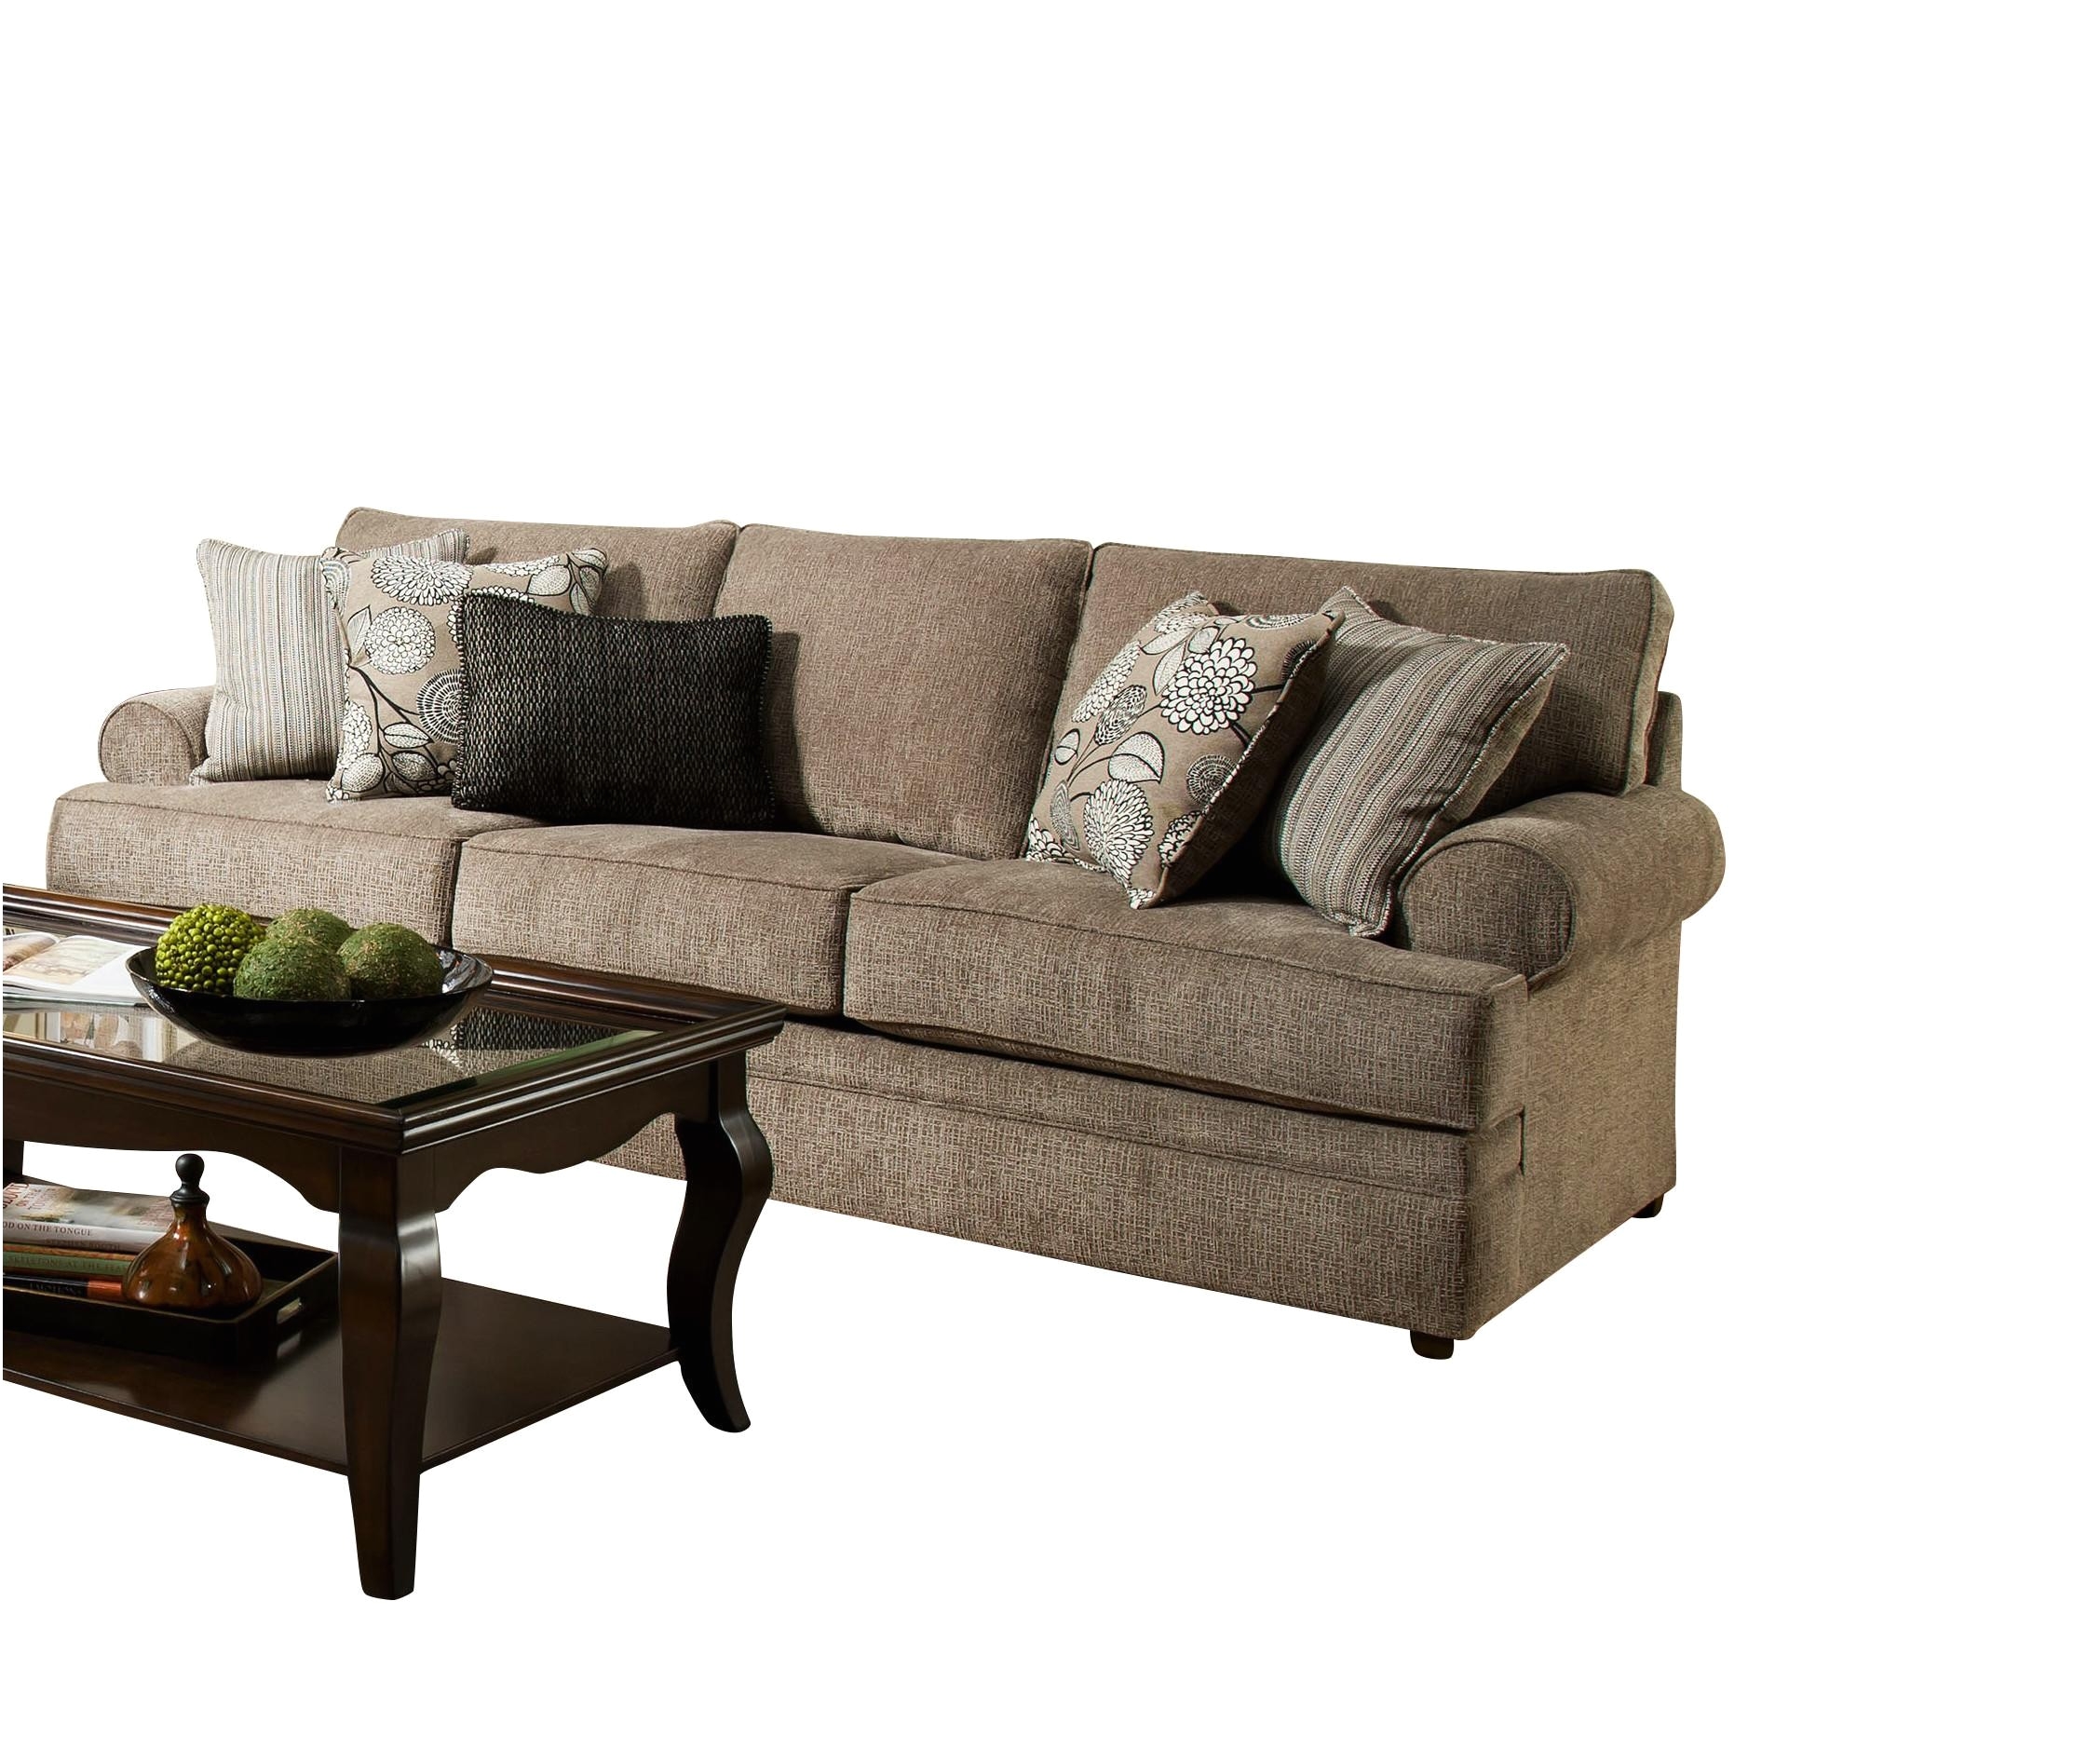 corduroy couches for sale big comfy couches for sale macys tufted sofa